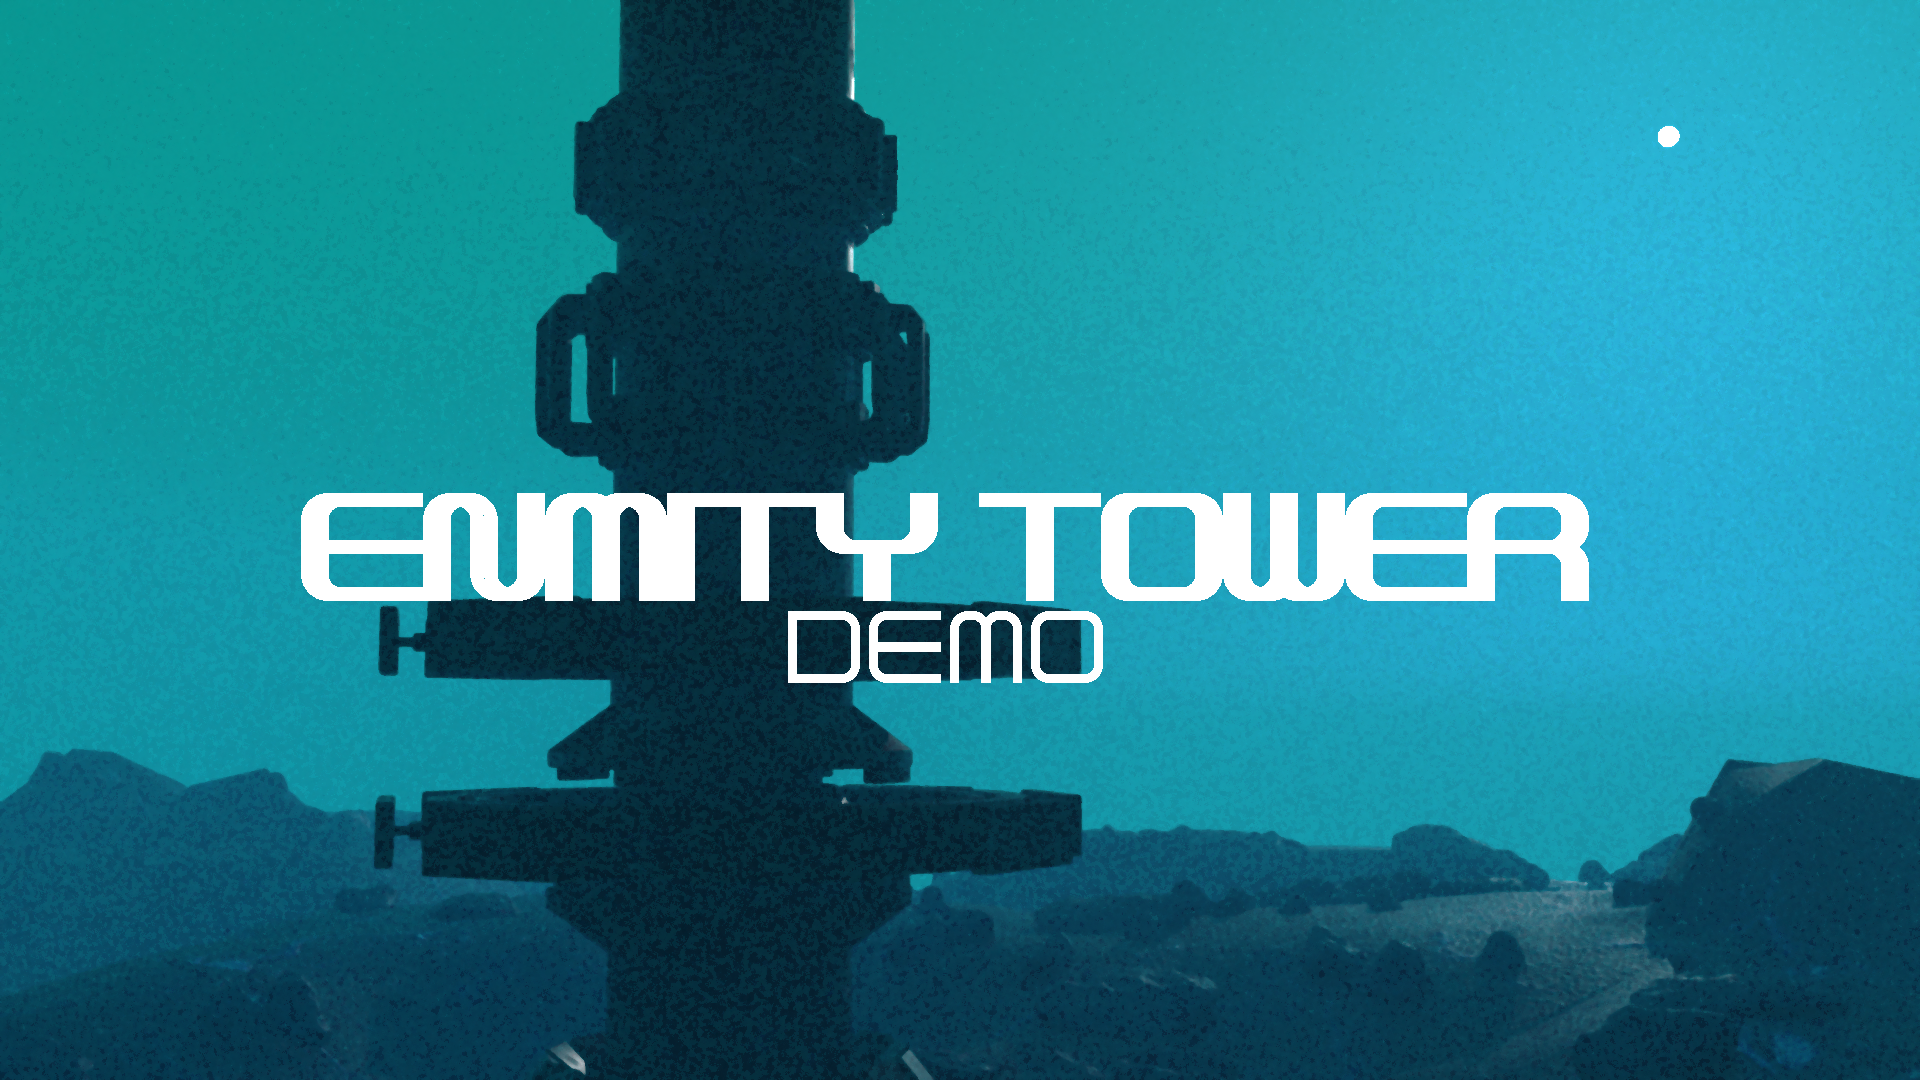 Enmity Tower Demo